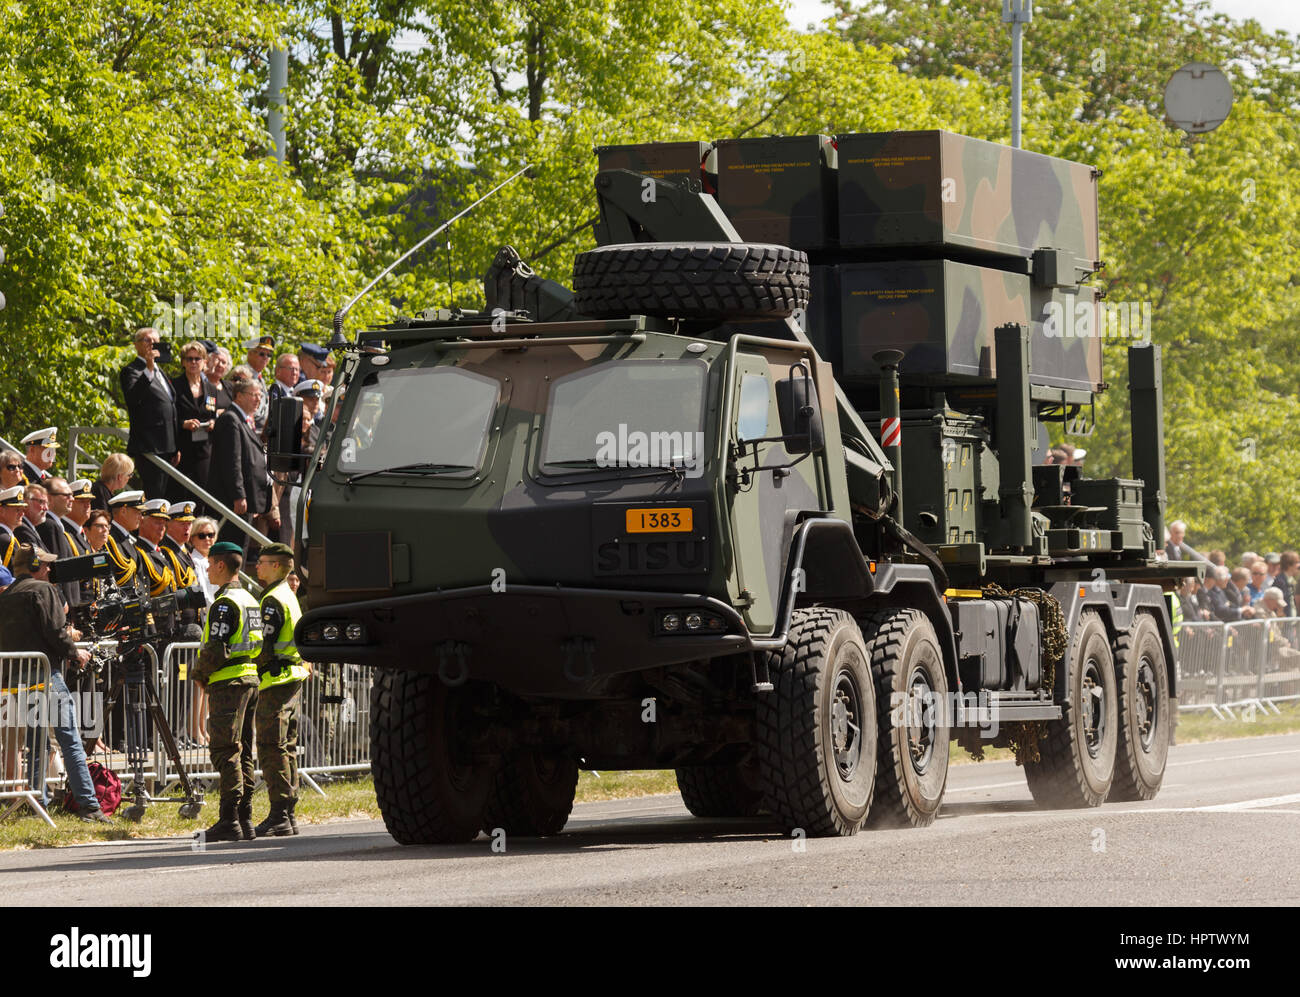 NASAMS surface-to-air missile system launch vehicle on Flag Day Parade in Turku, Finland on 4th June 2016. Stock Photo